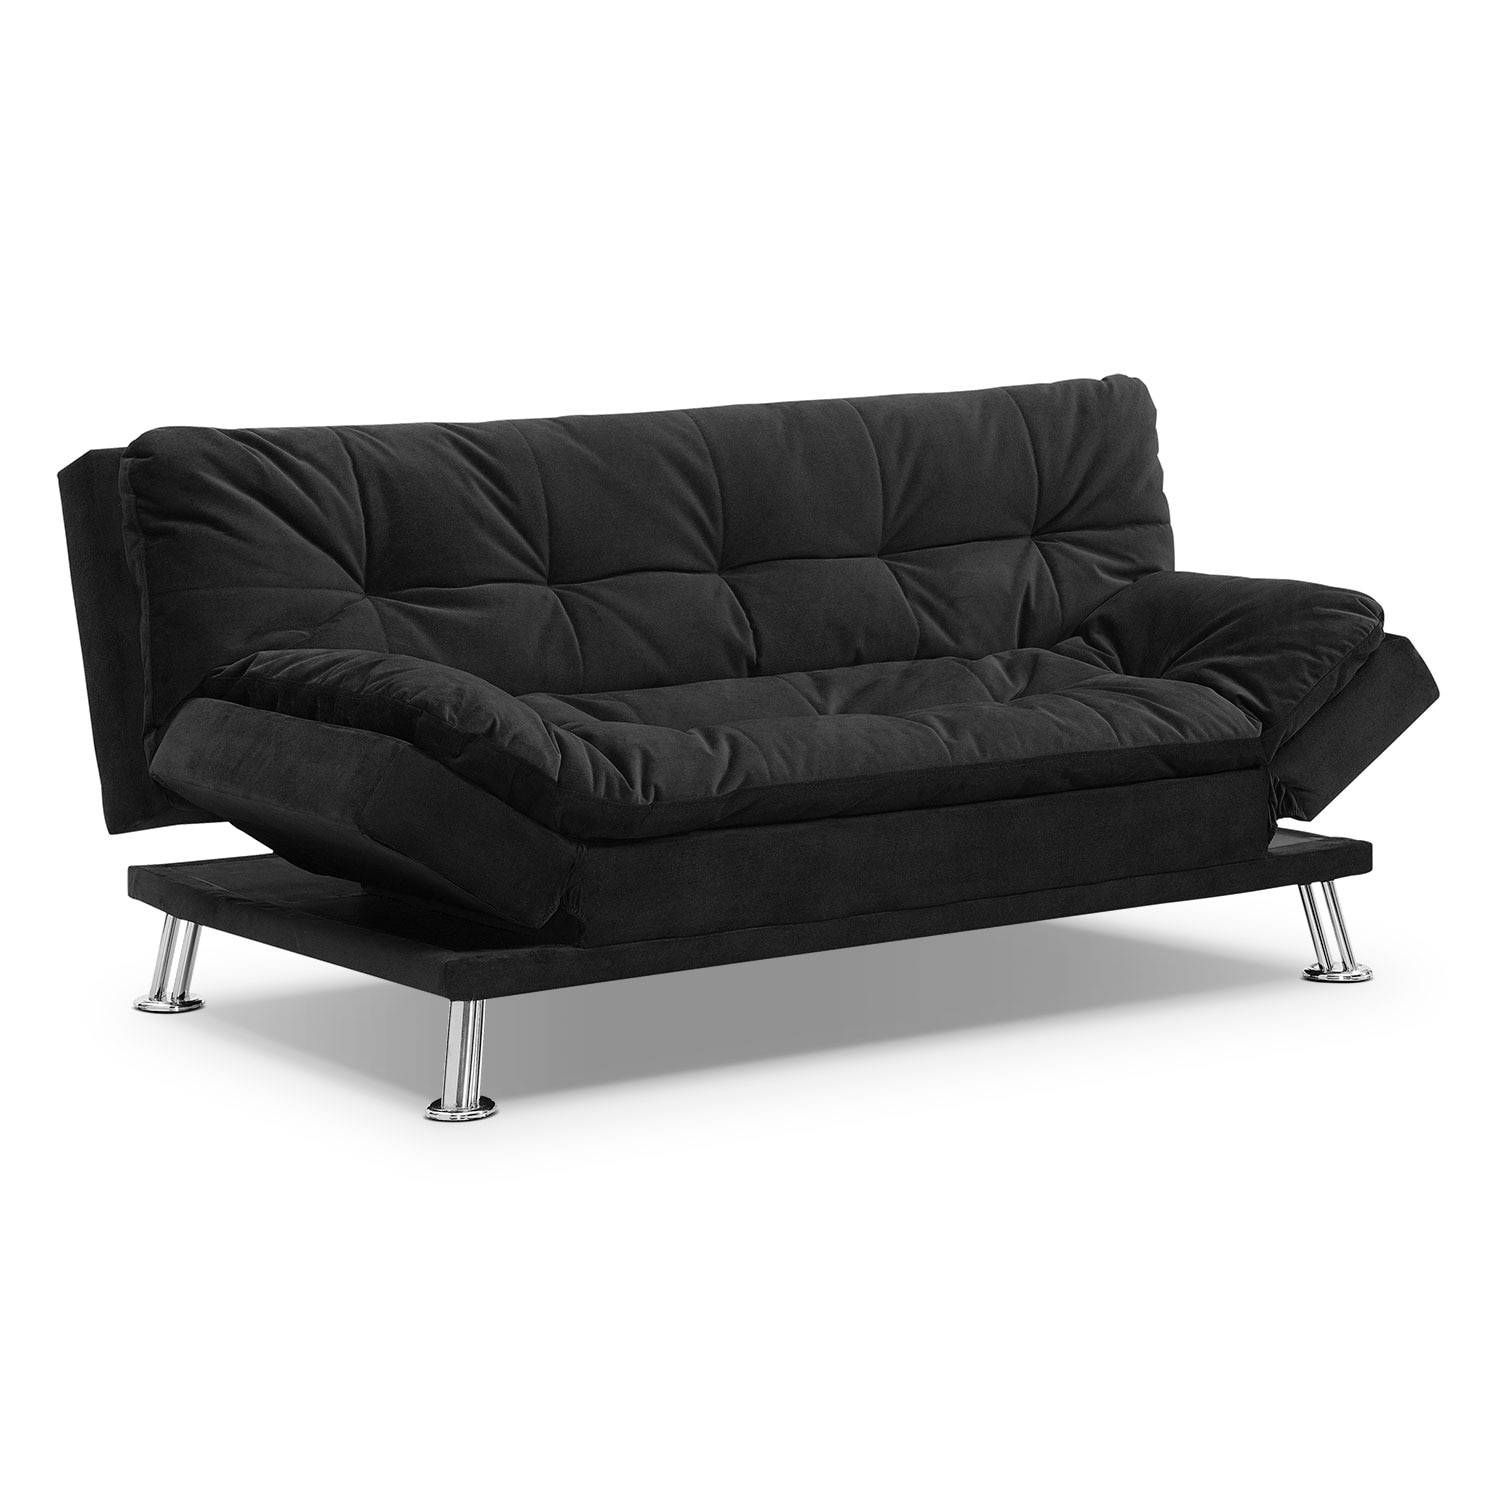 Waltz Futon Sofa Bed – Black | Value City Furniture Intended For Florence Sofa Beds (View 20 of 25)